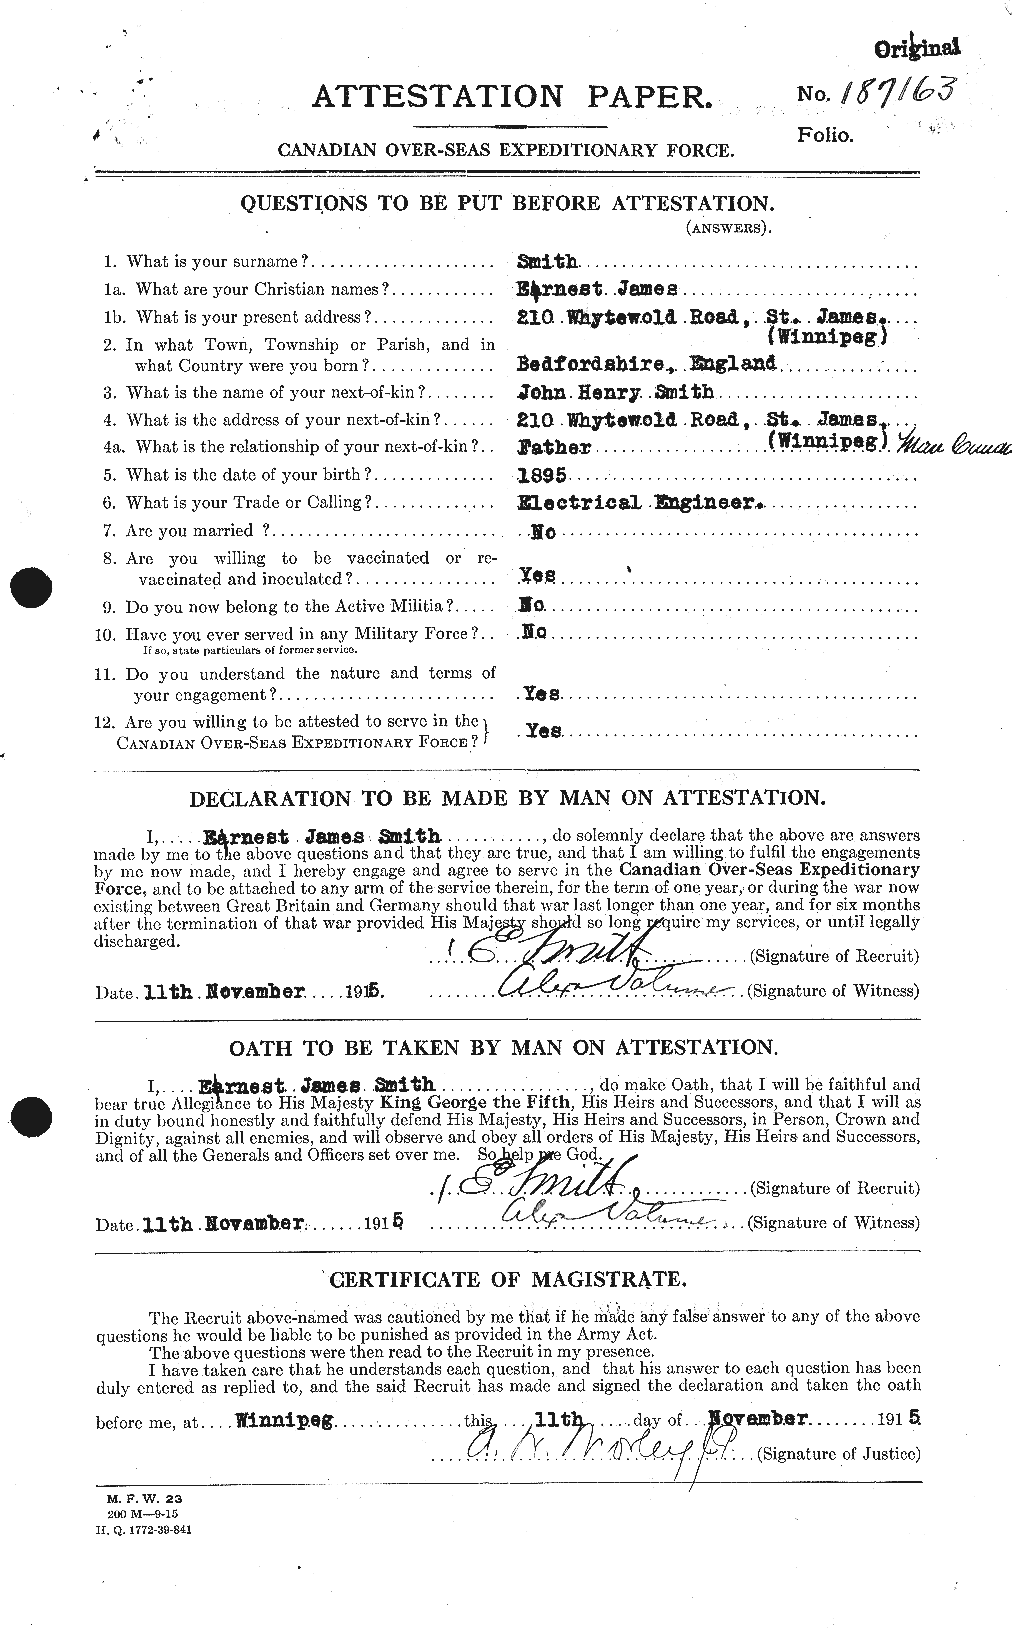 Personnel Records of the First World War - CEF 621203a